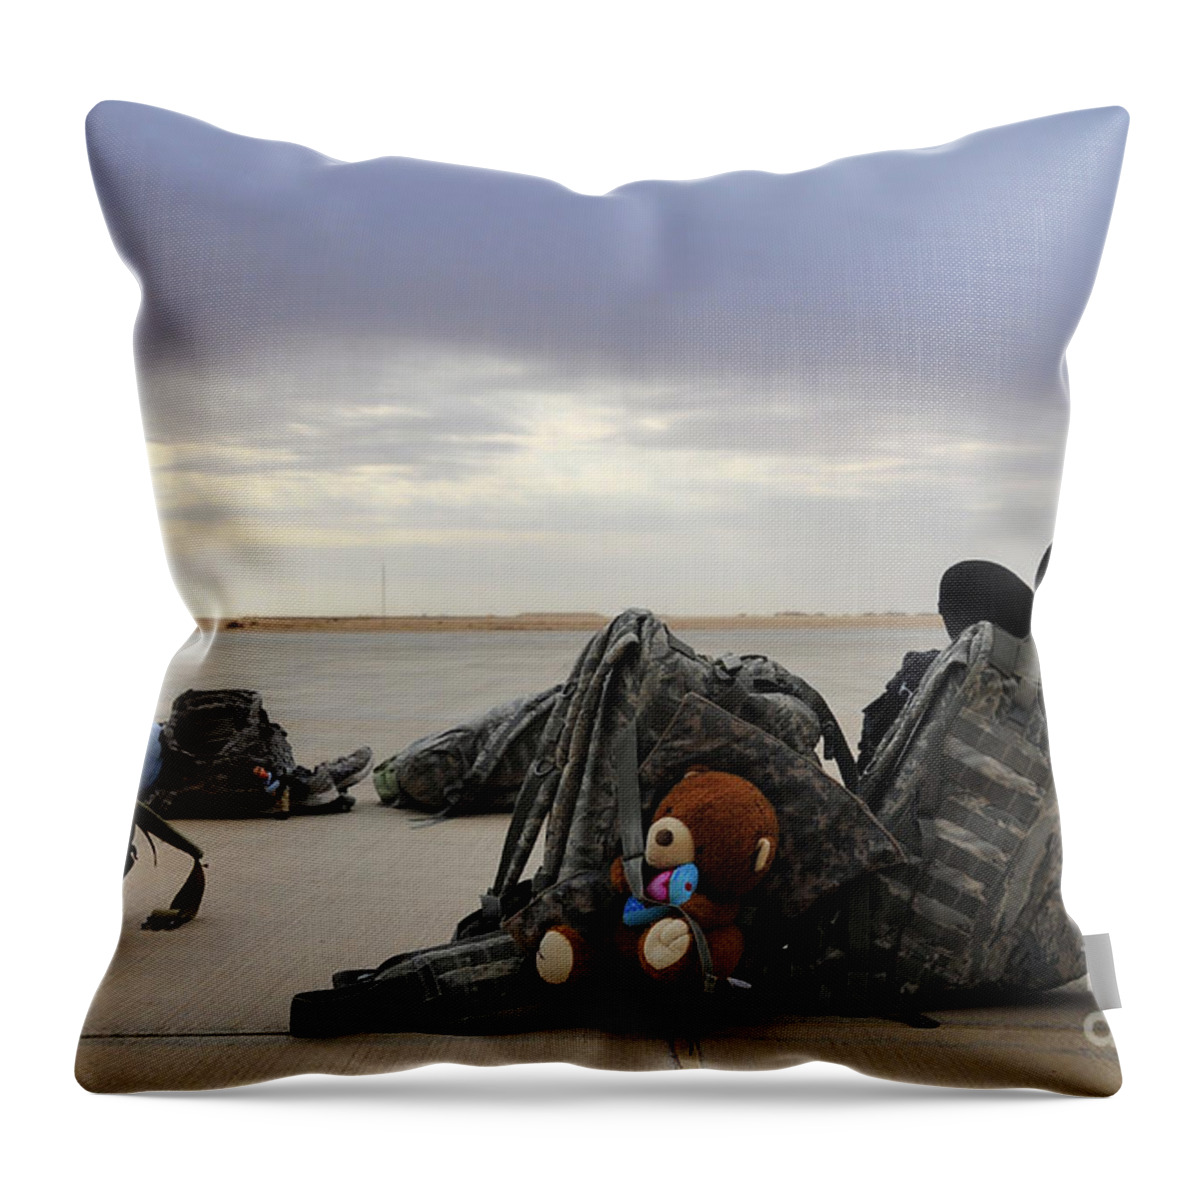 Iraq Throw Pillow featuring the photograph Soldiers Backpacks On The Flight Line by Stocktrek Images